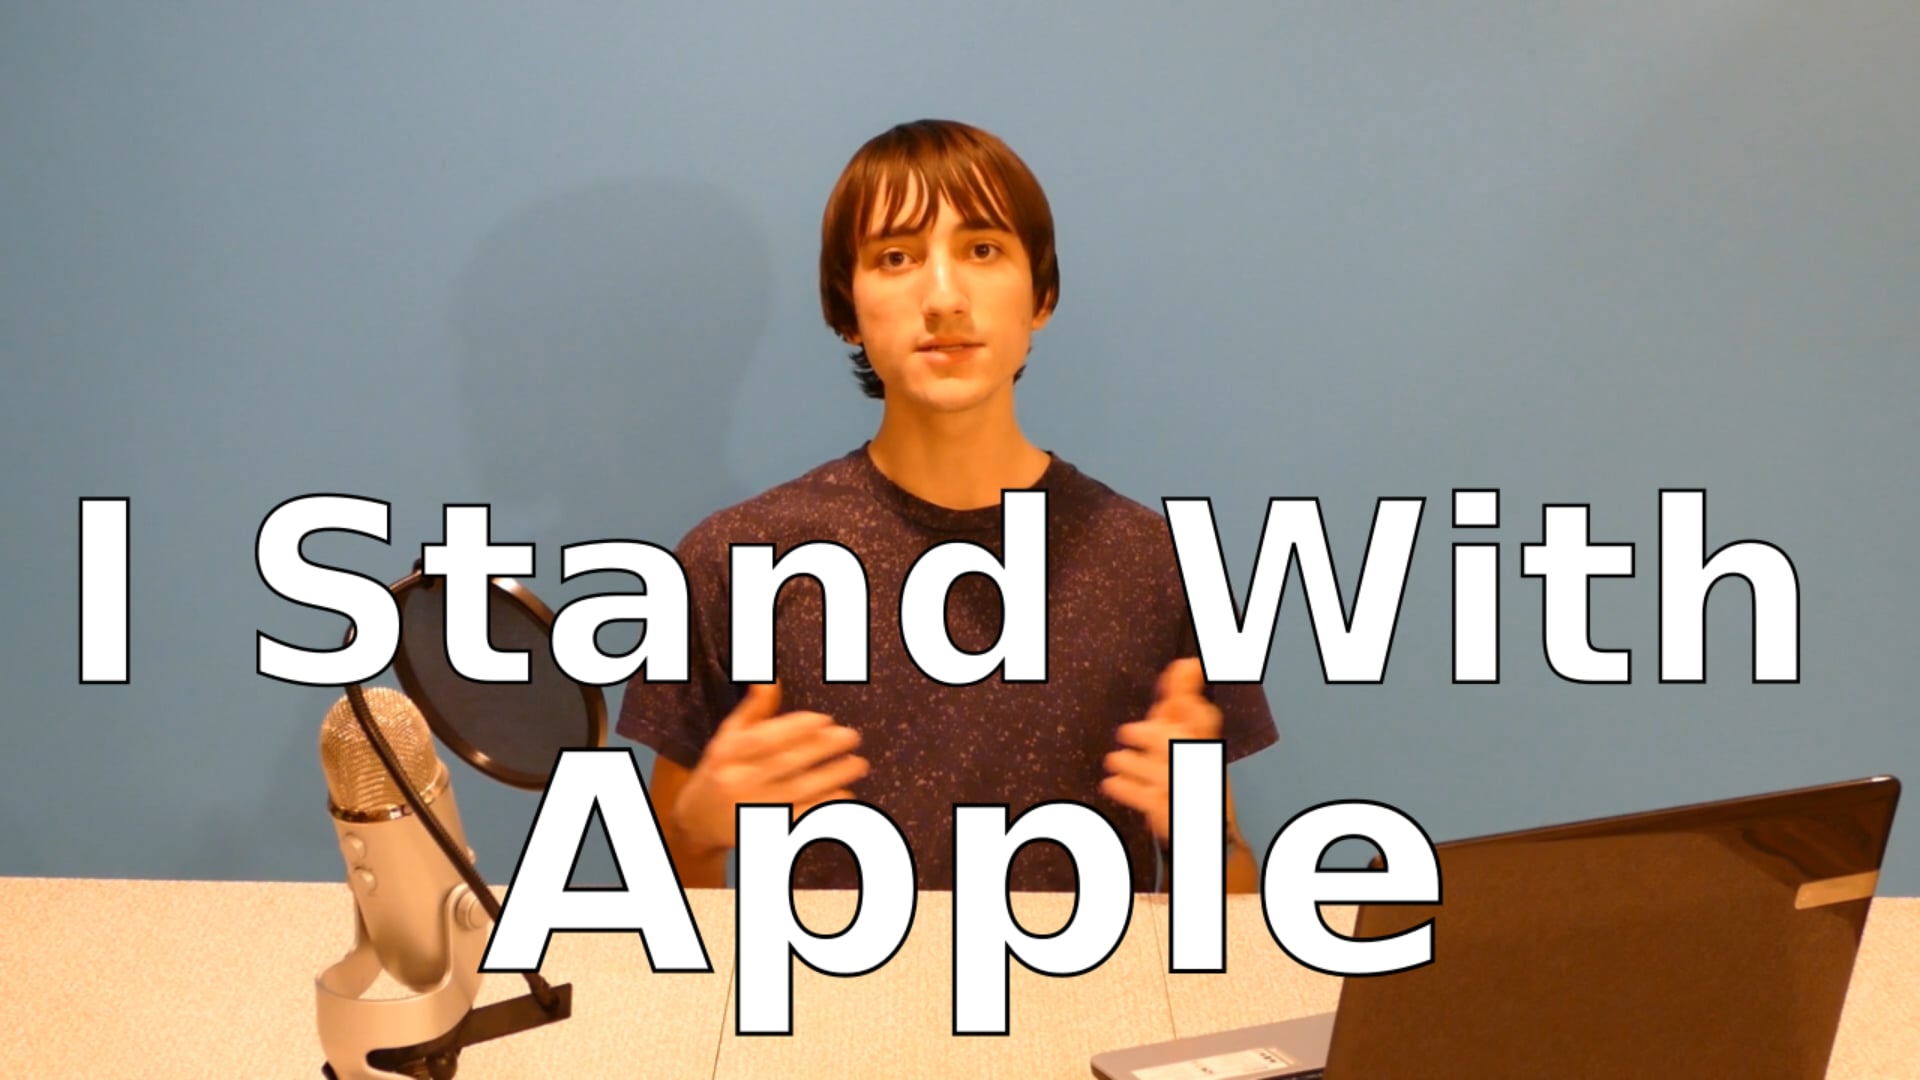 I Stand with Apple